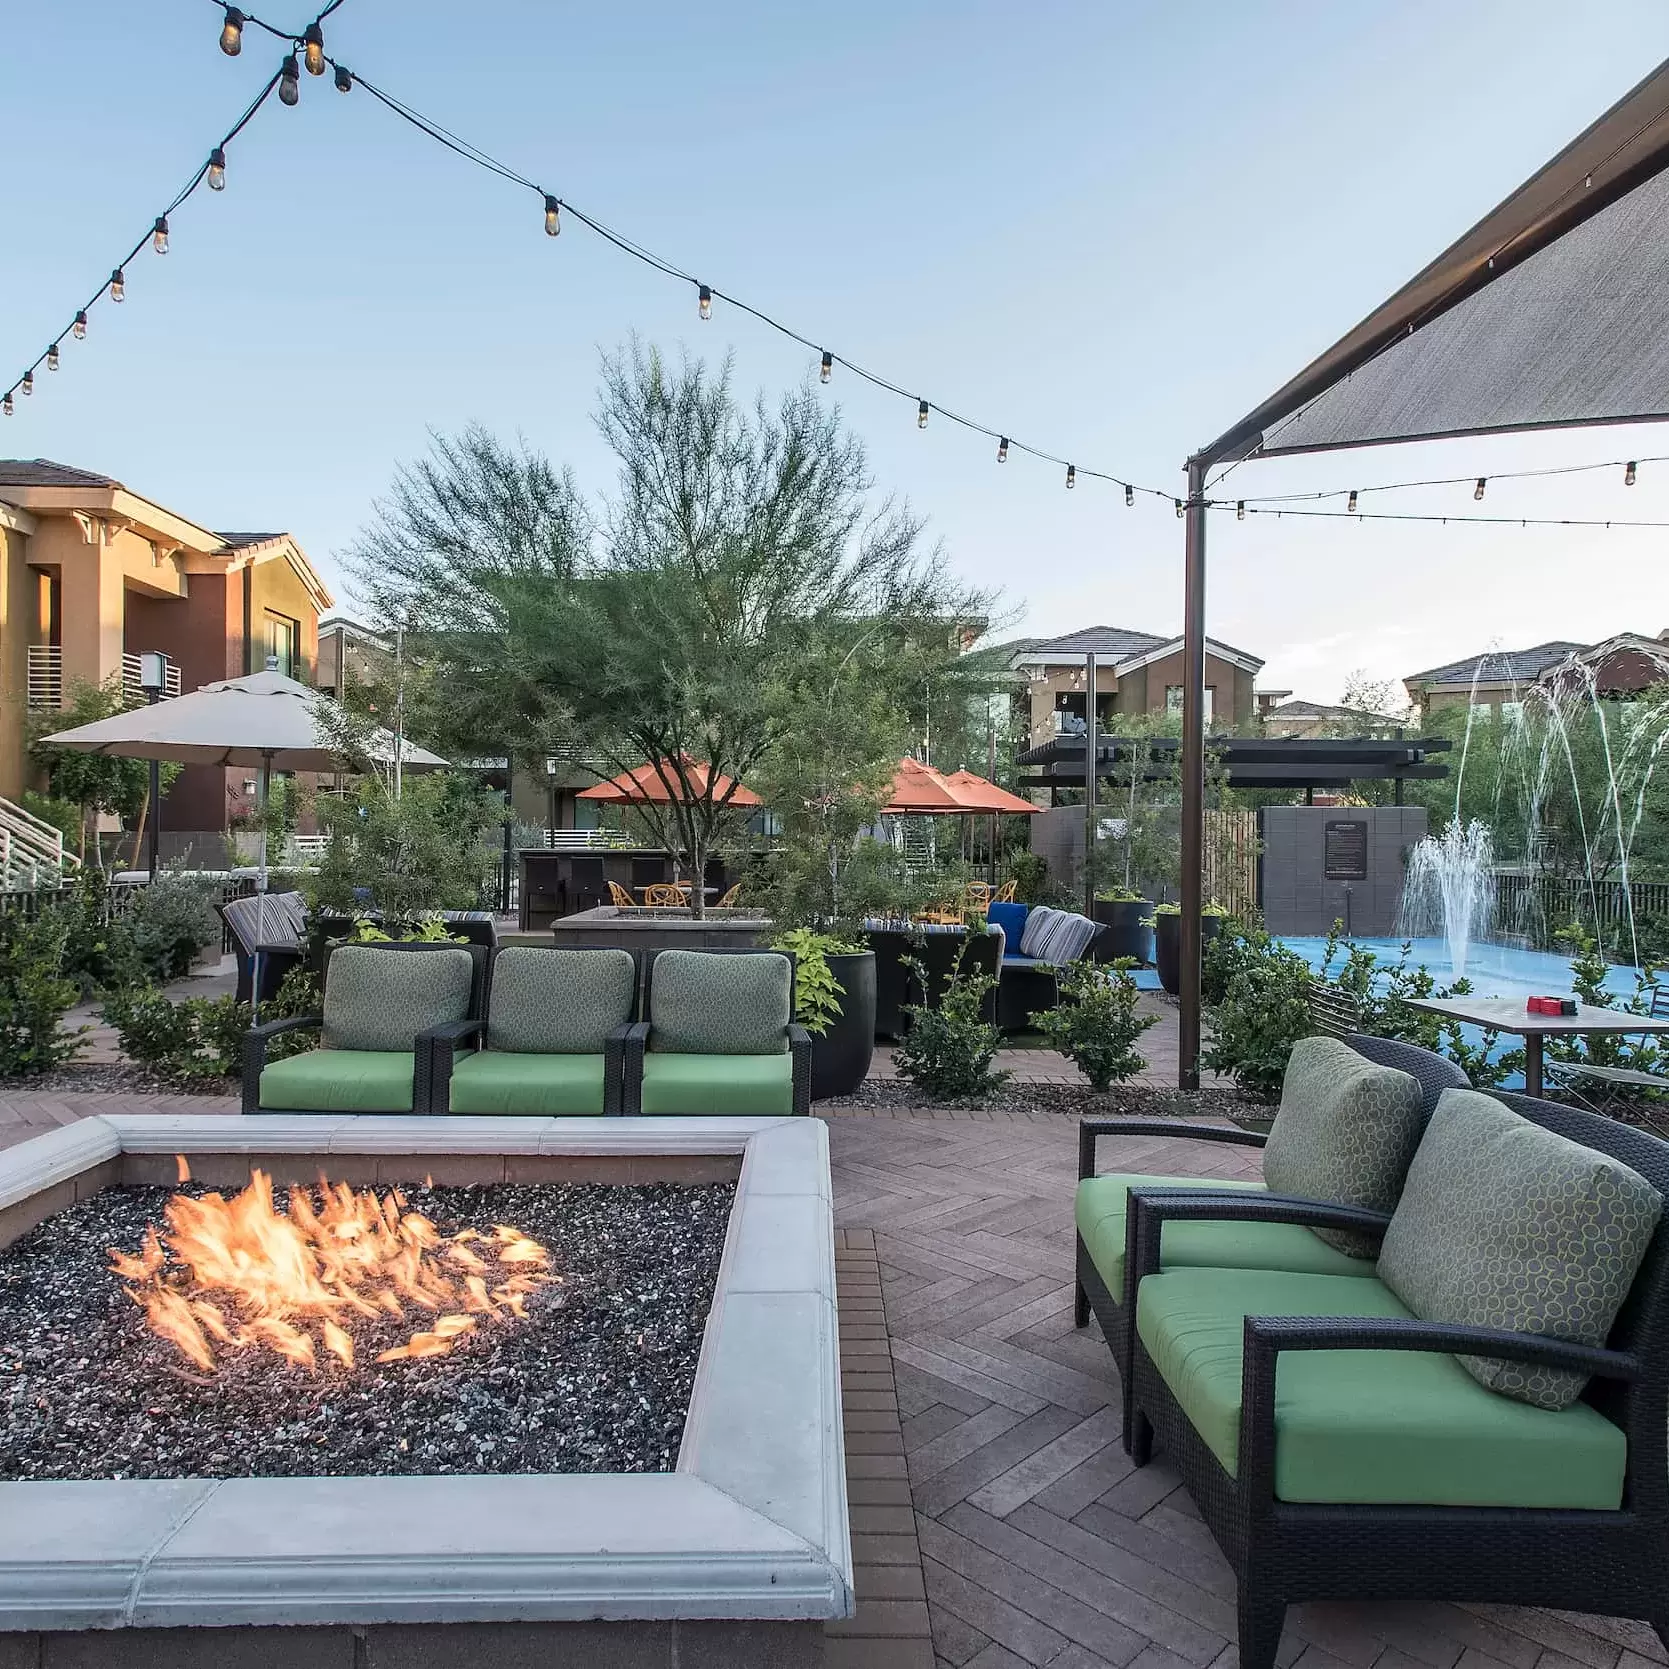 Chairs surround a firepit on the patio at the Liv Ahwatukee apartment complex.